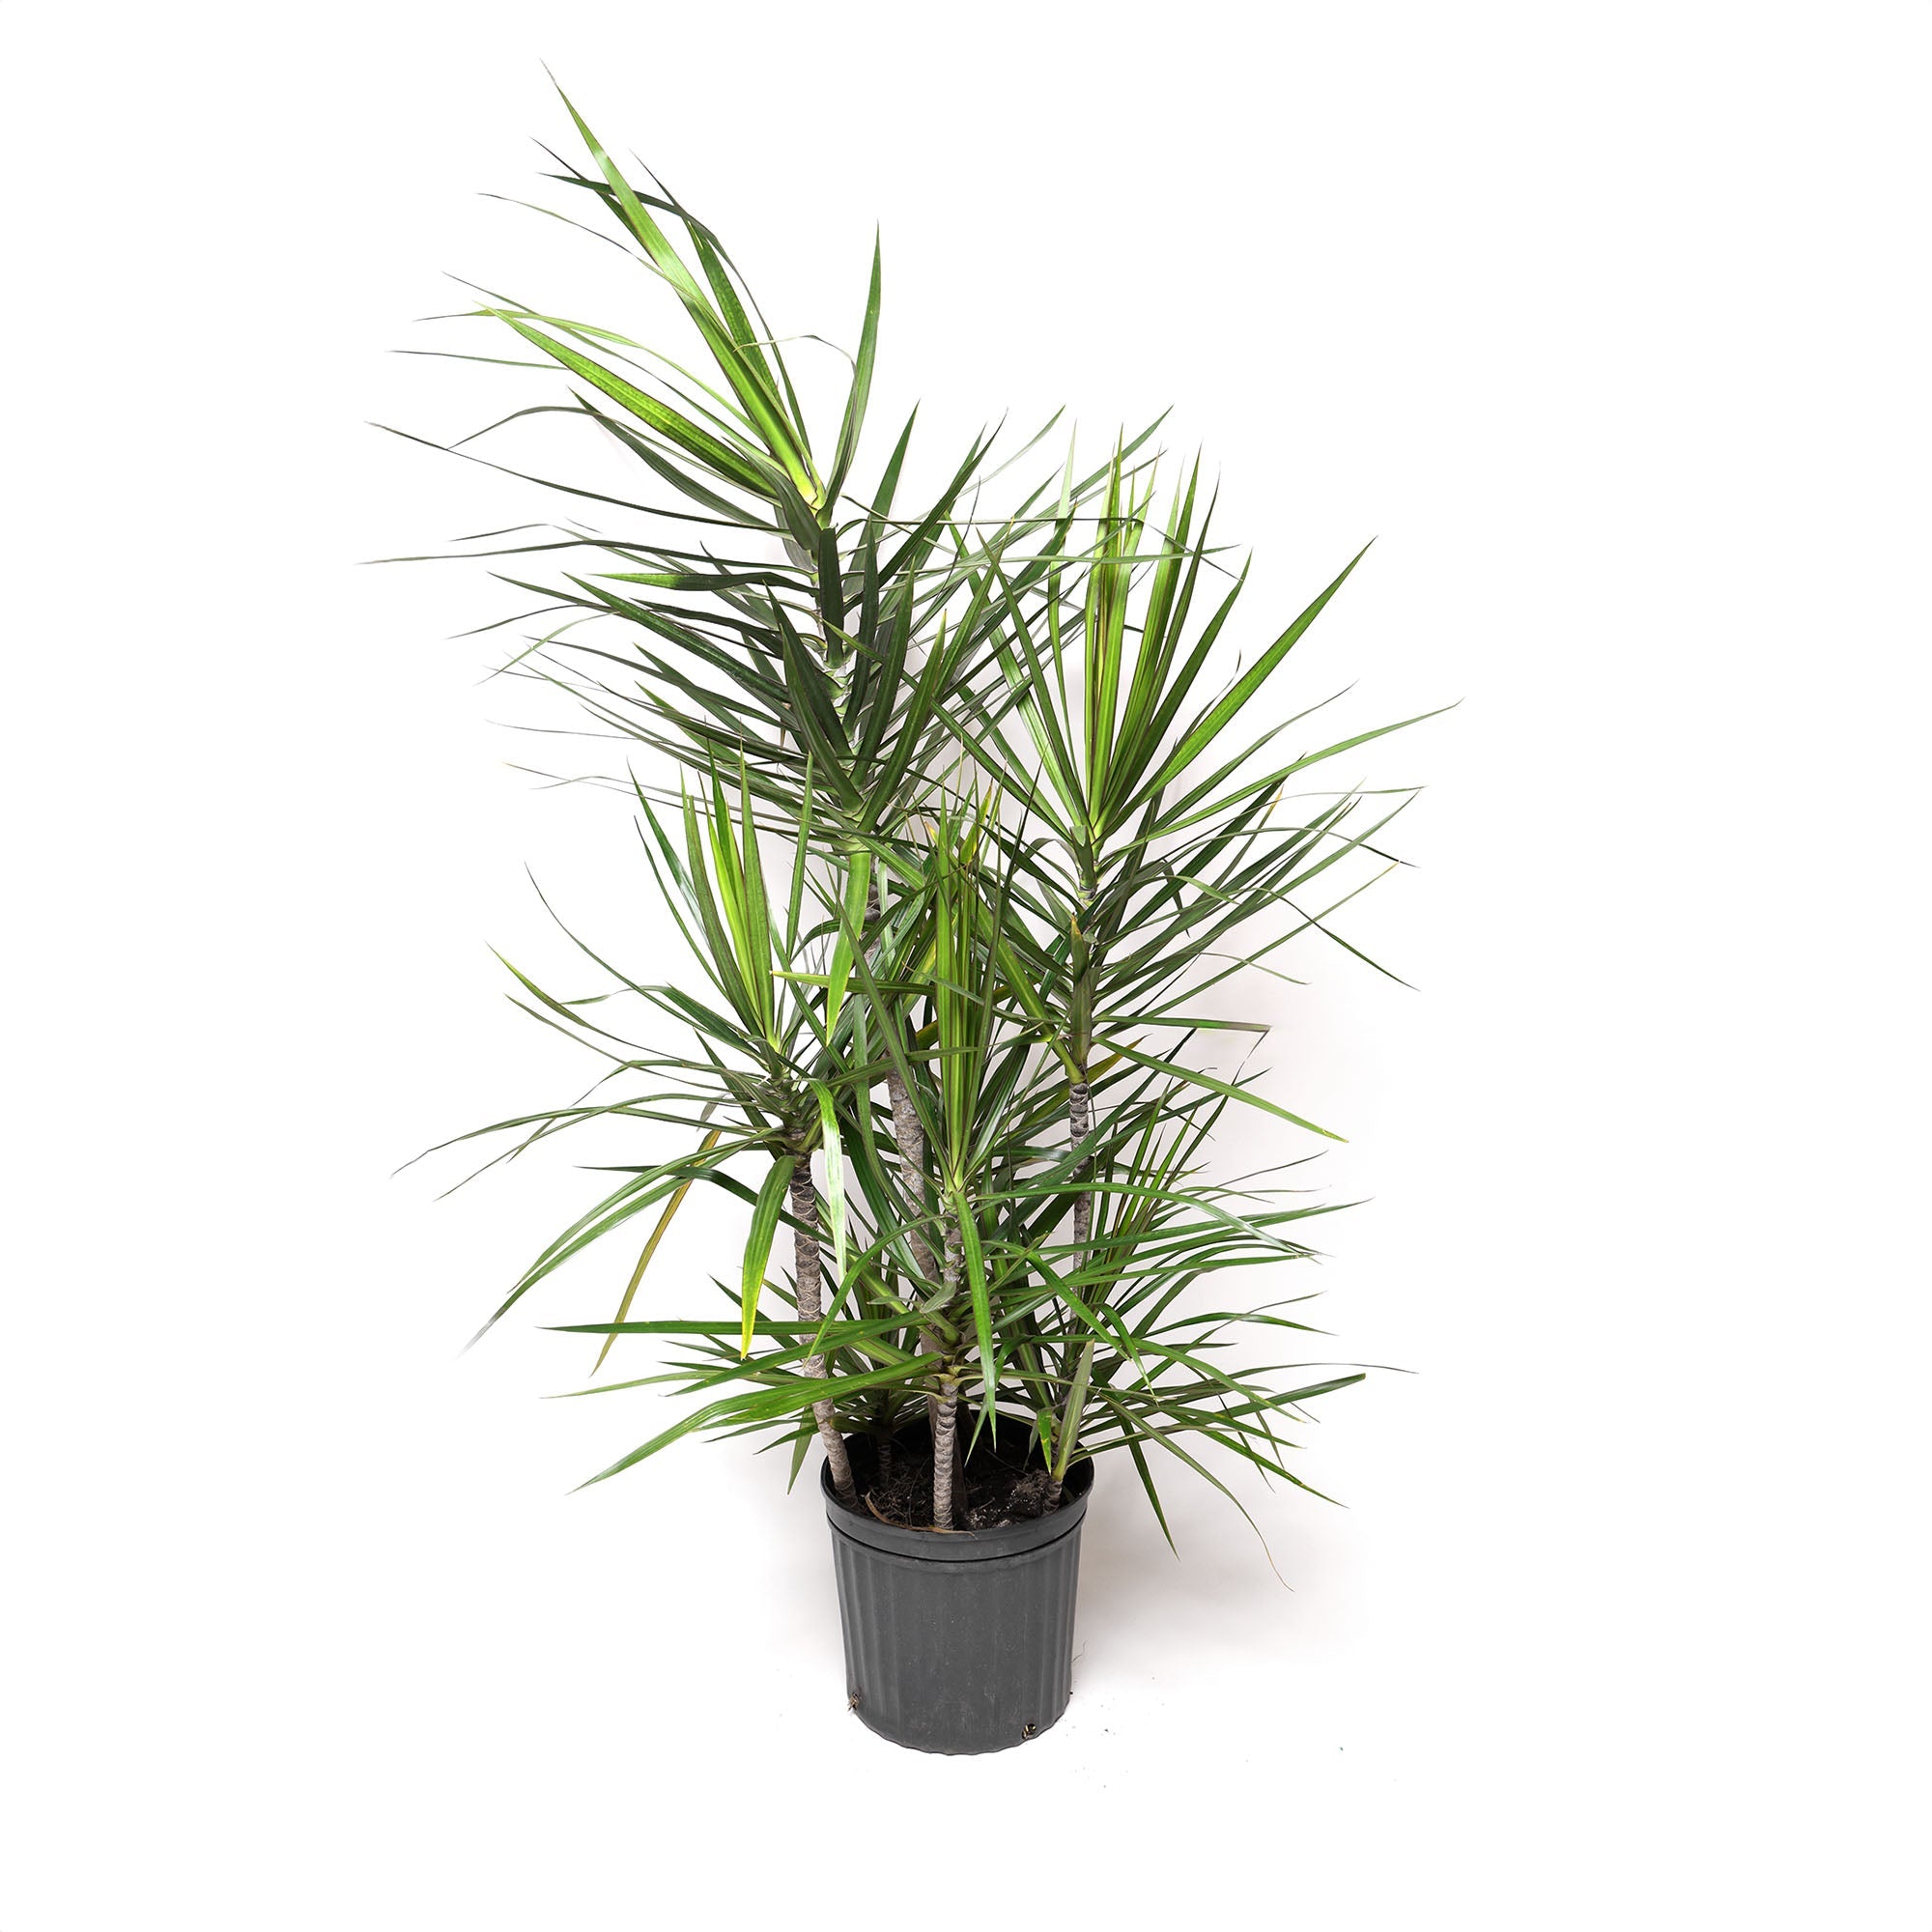 A Dracaena Marginata Staggered 12 Inches plant with long, narrow green leaves edged in red, potted in a black container against a white background.